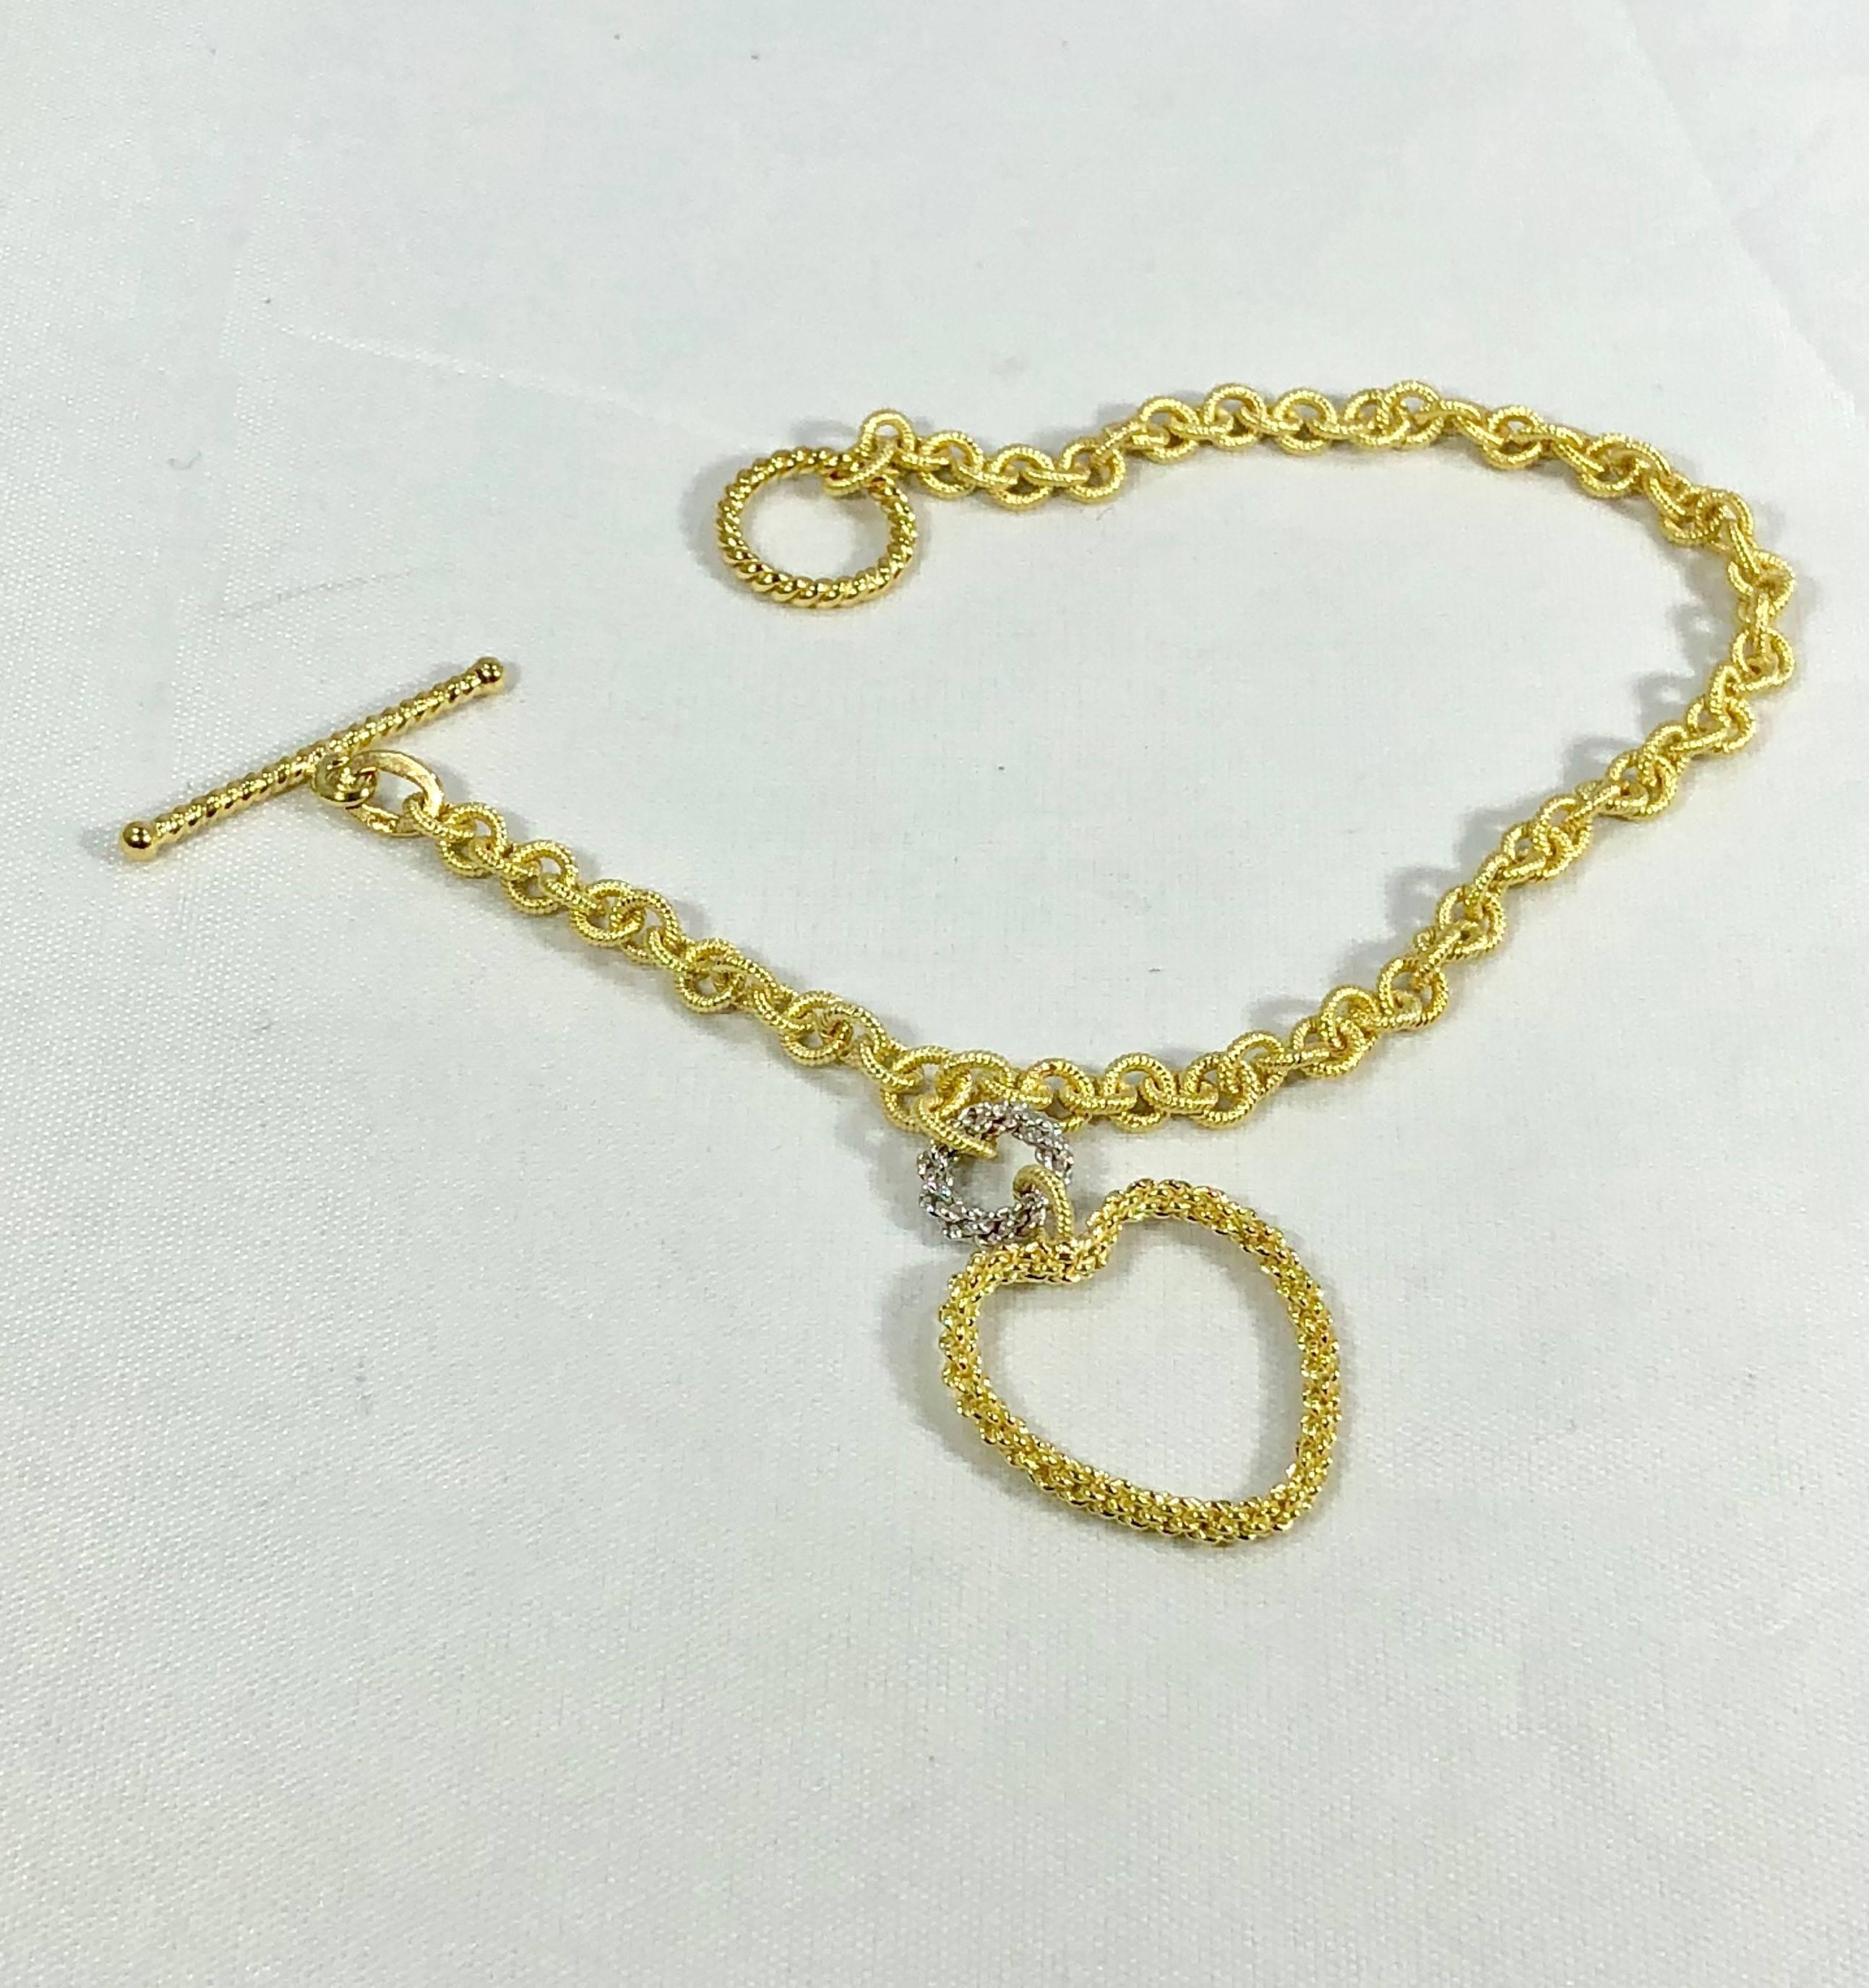 Old World Chain 18 karat two tone white and yellow  gold fancy anchor link bracelet. This is a unique bracelet designed by Old World Chain, measuring 7 5/8 inch length, 4mm wide approx..There is an 18 karat yellow gold woven open heart measuring